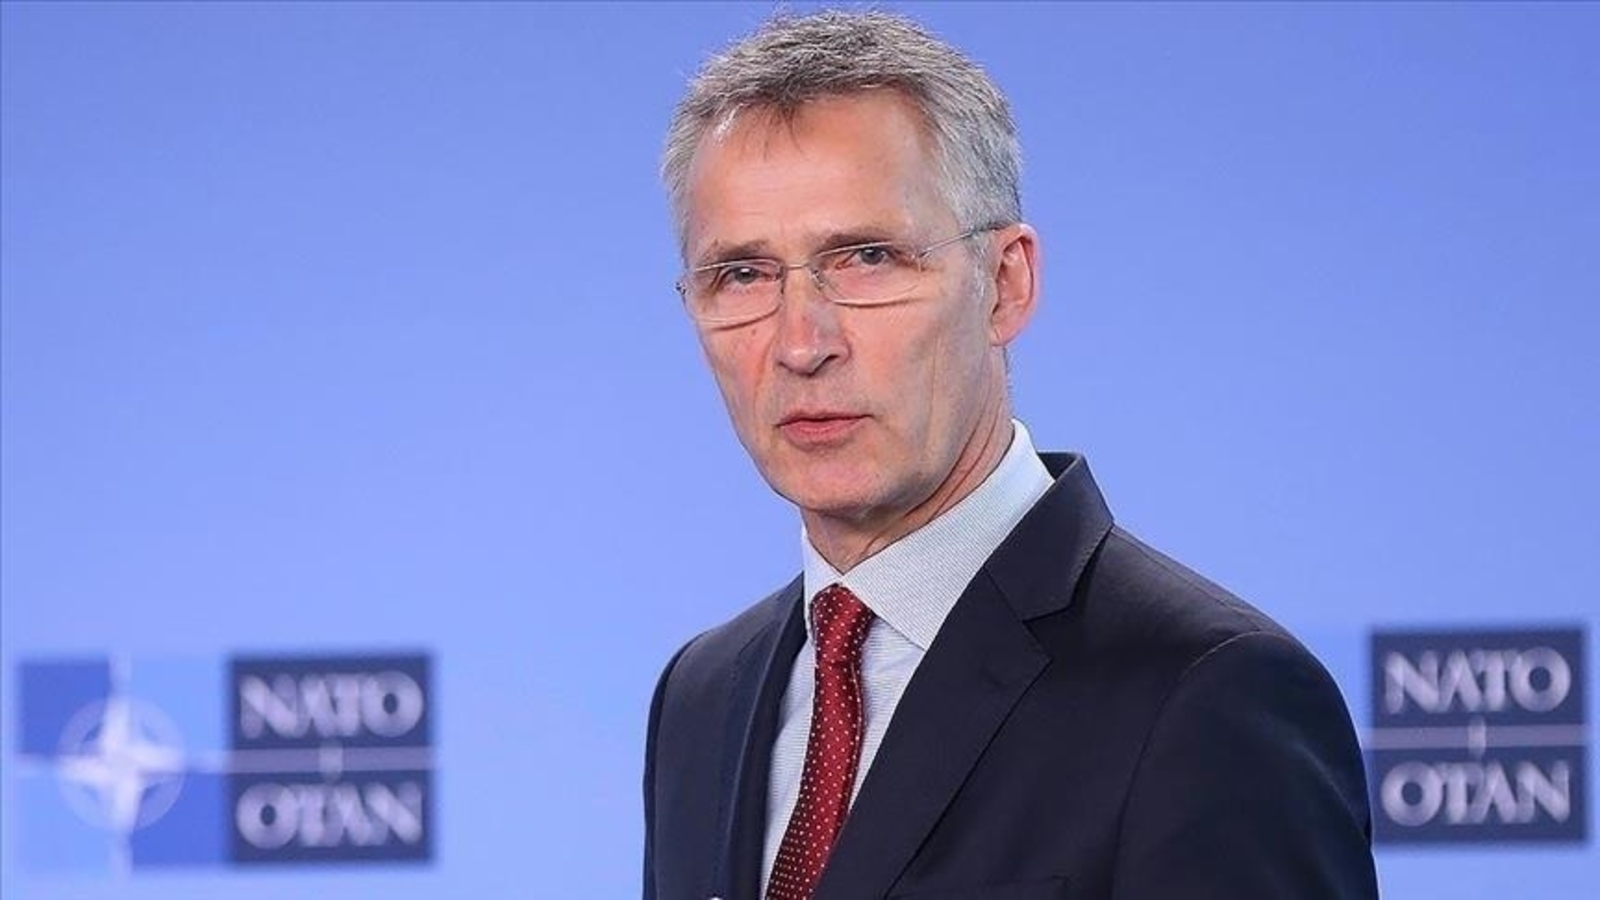 NATO chief Stoltenberg to stay for one more year